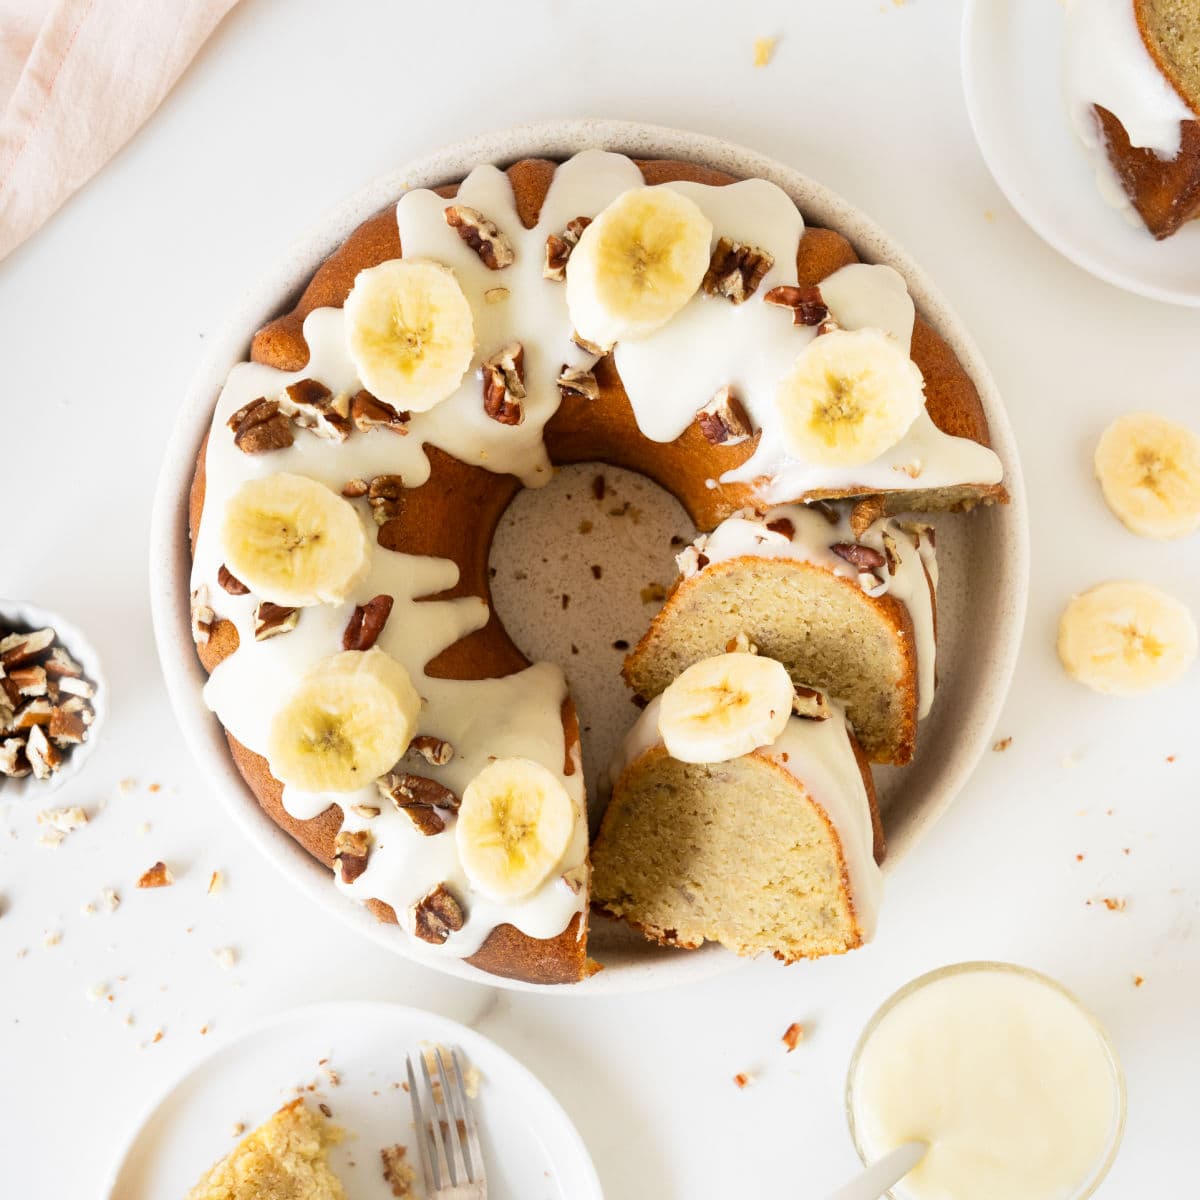 Mini Bundt Cakes with Bananas and Walnuts (Healthy, No Oil!)